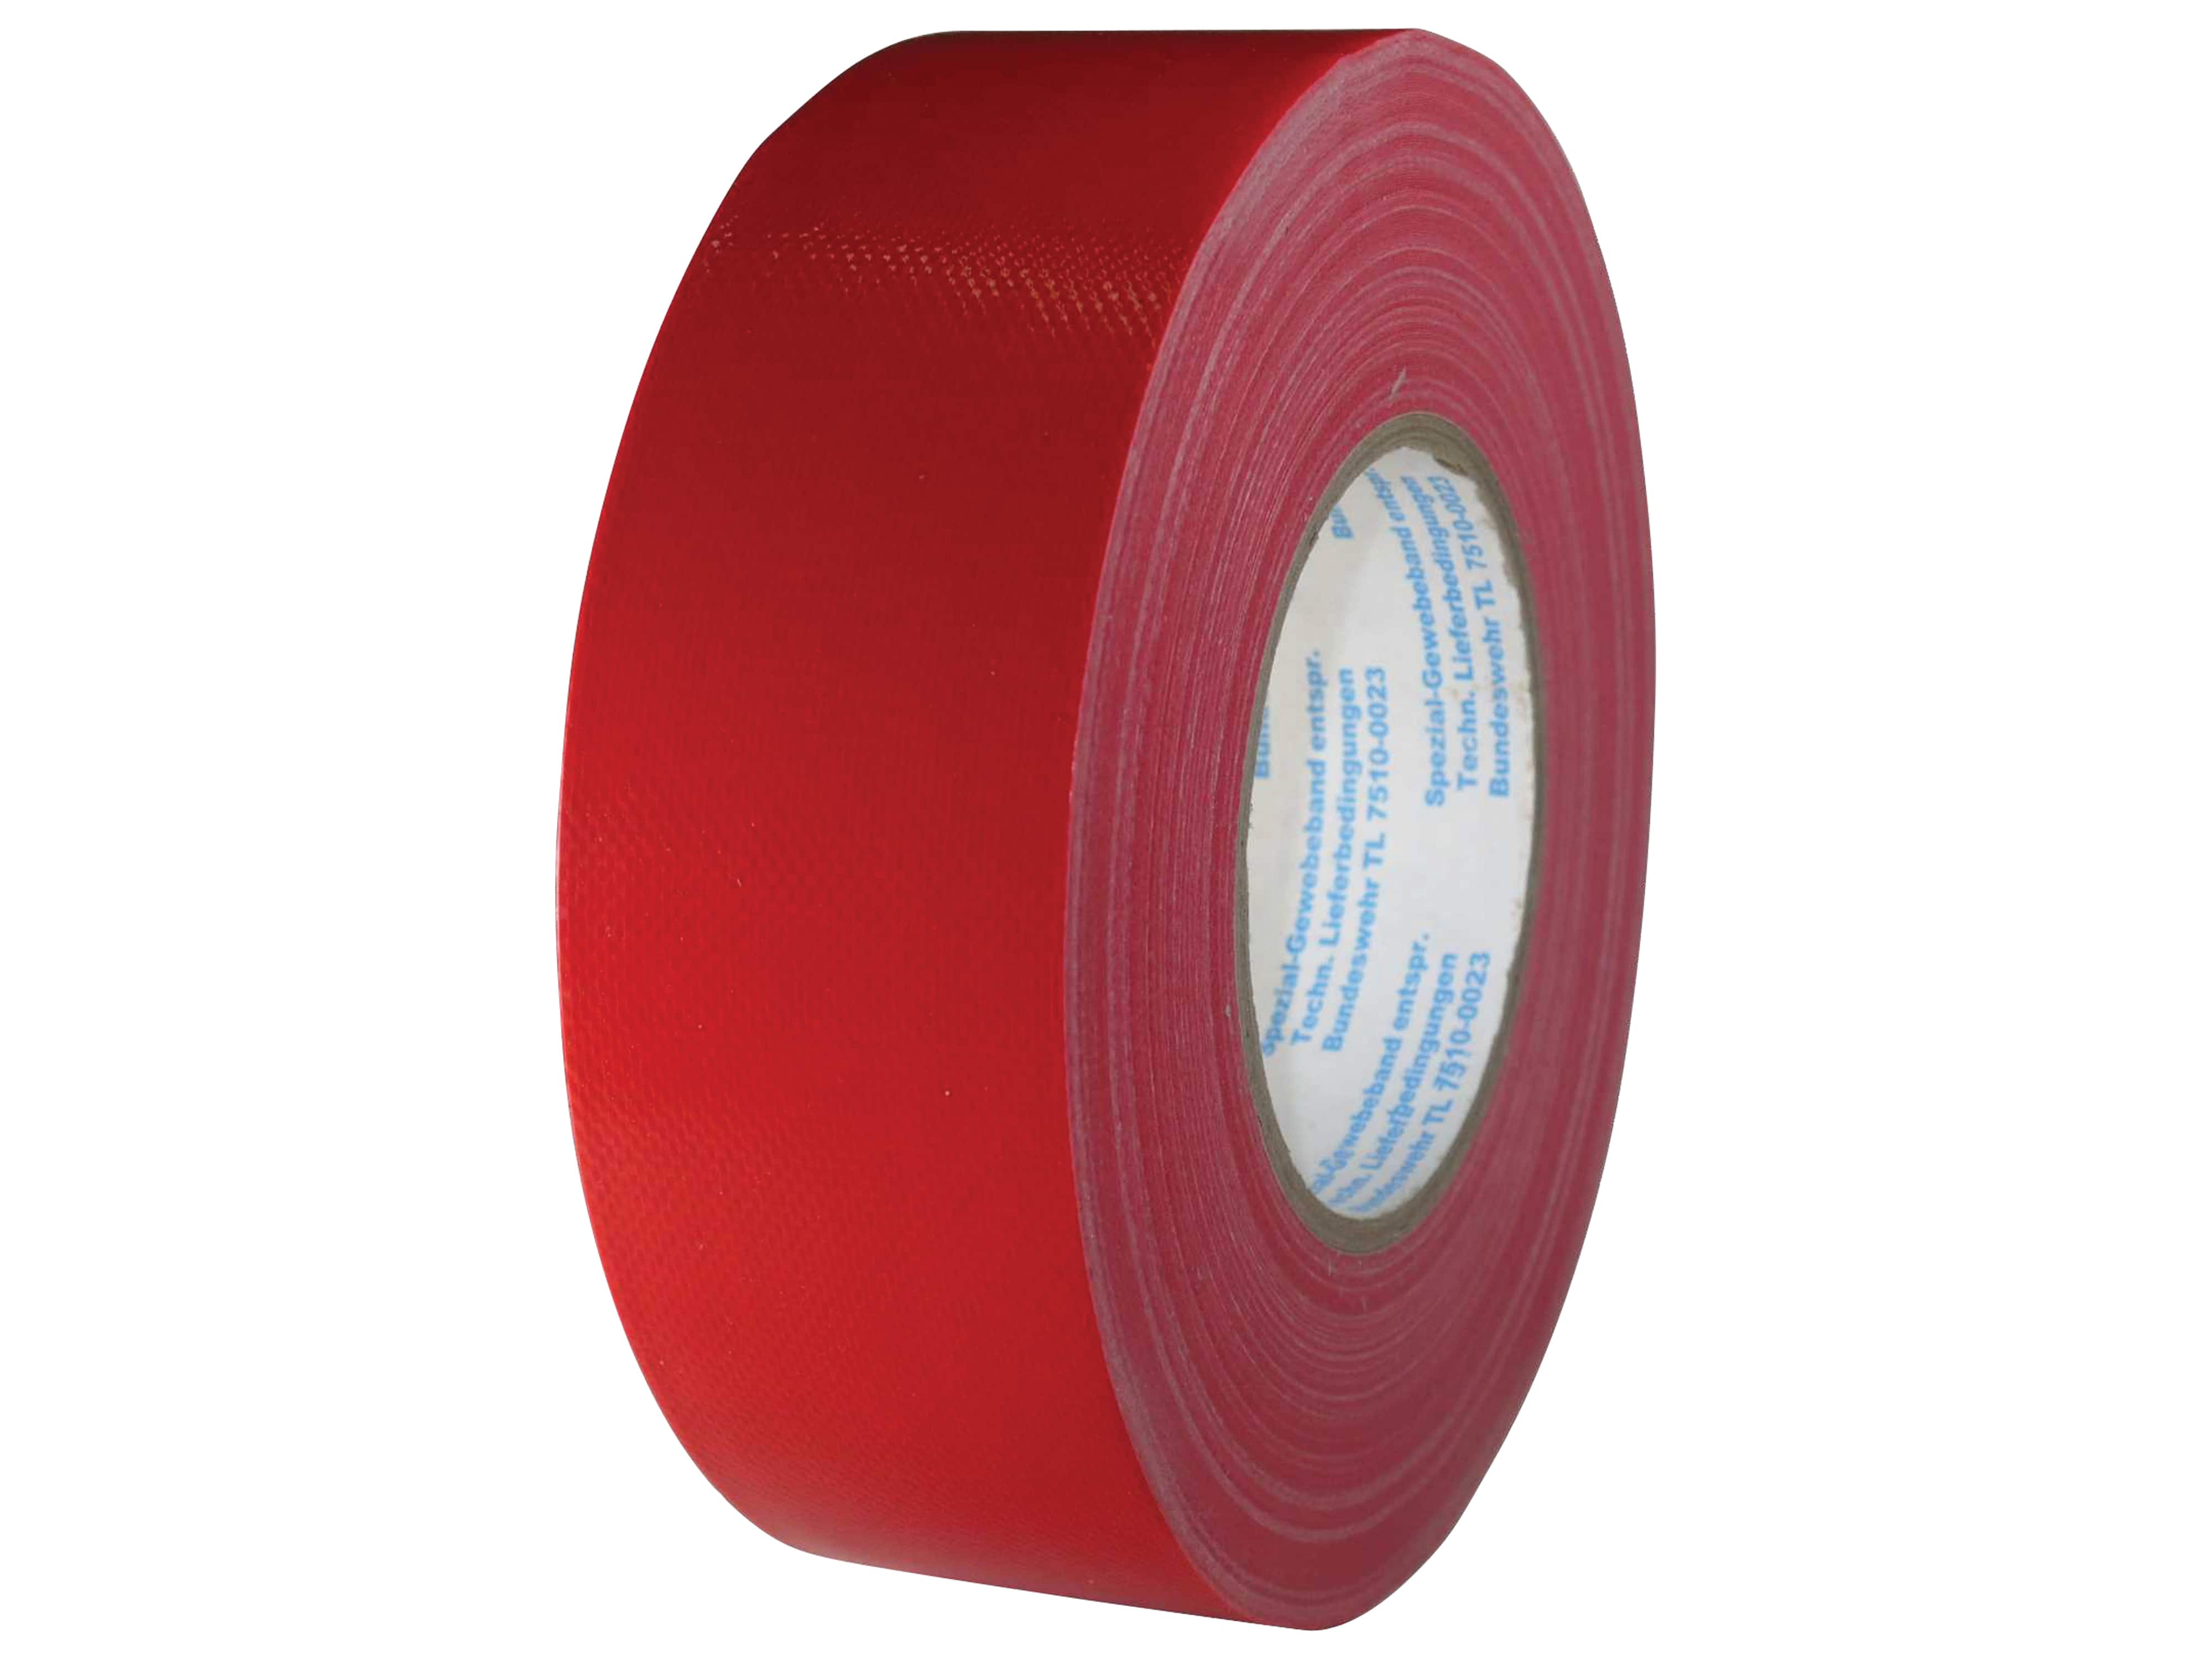 PRIOTEC Industrie Panzerband, rot, 50 mm x 50 m